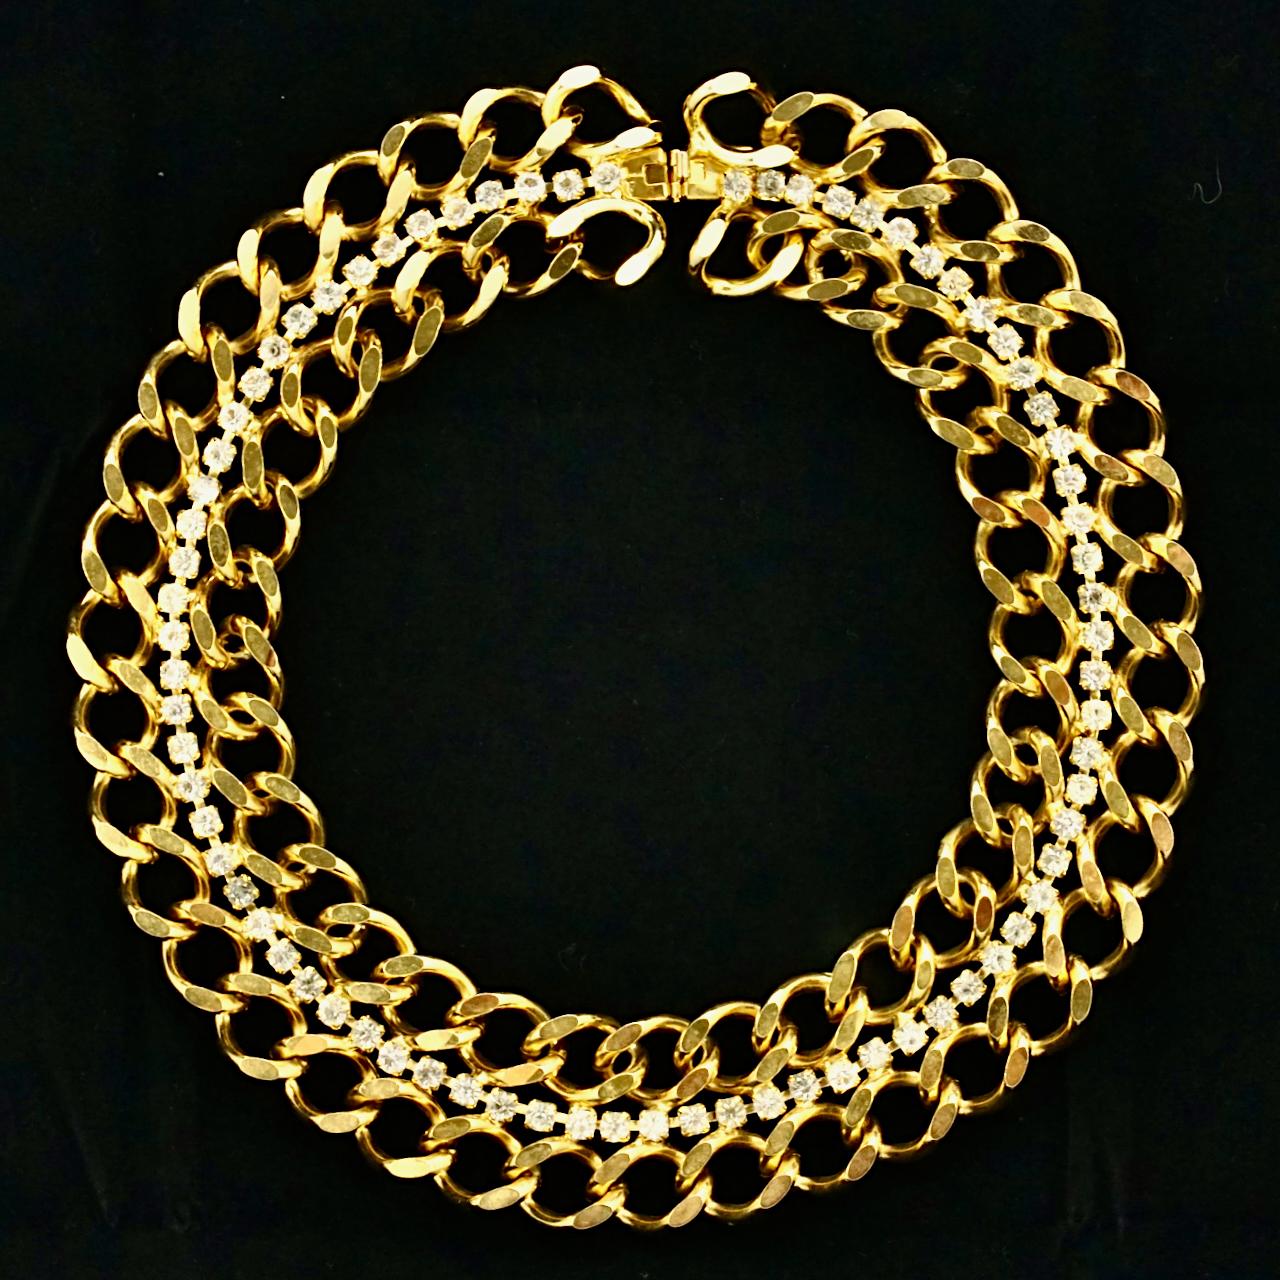 Gold Plated Curb Link Chain Collar Necklace with Rhinestones circa 1980s For Sale 5